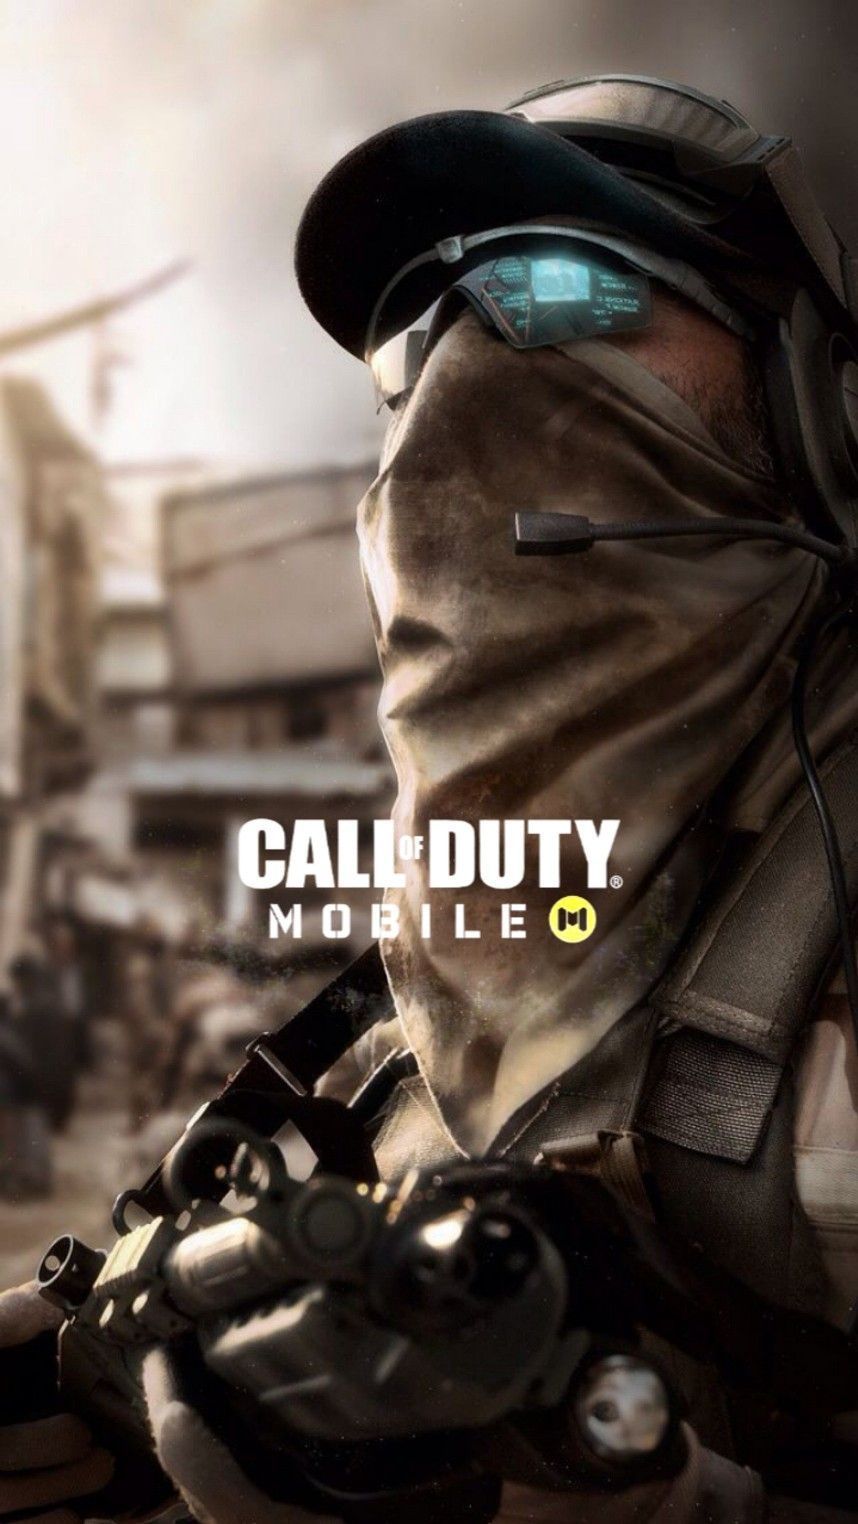 Wallpaper Call Of Duty Mobile. Call of duty, Cod game, Joker pics